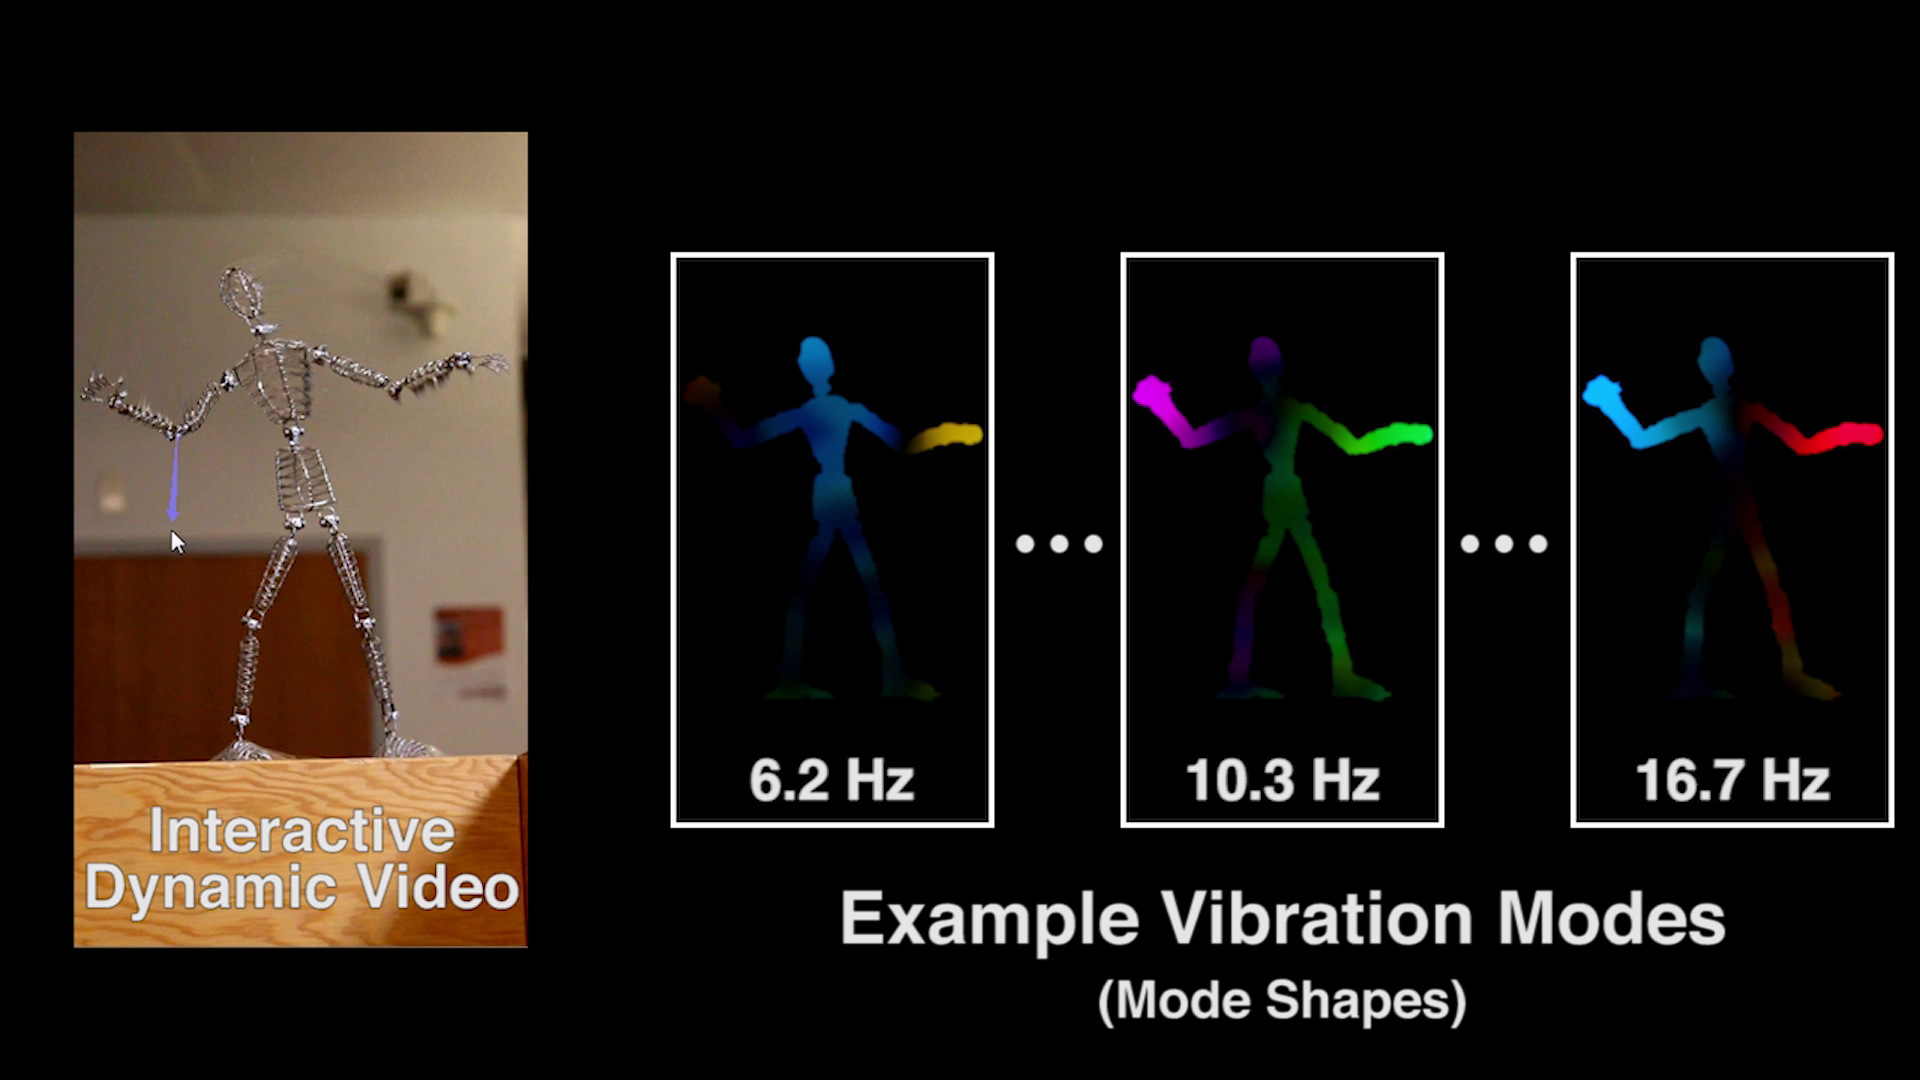 Reach in and touch objects in videos with “Interactive Dynamic